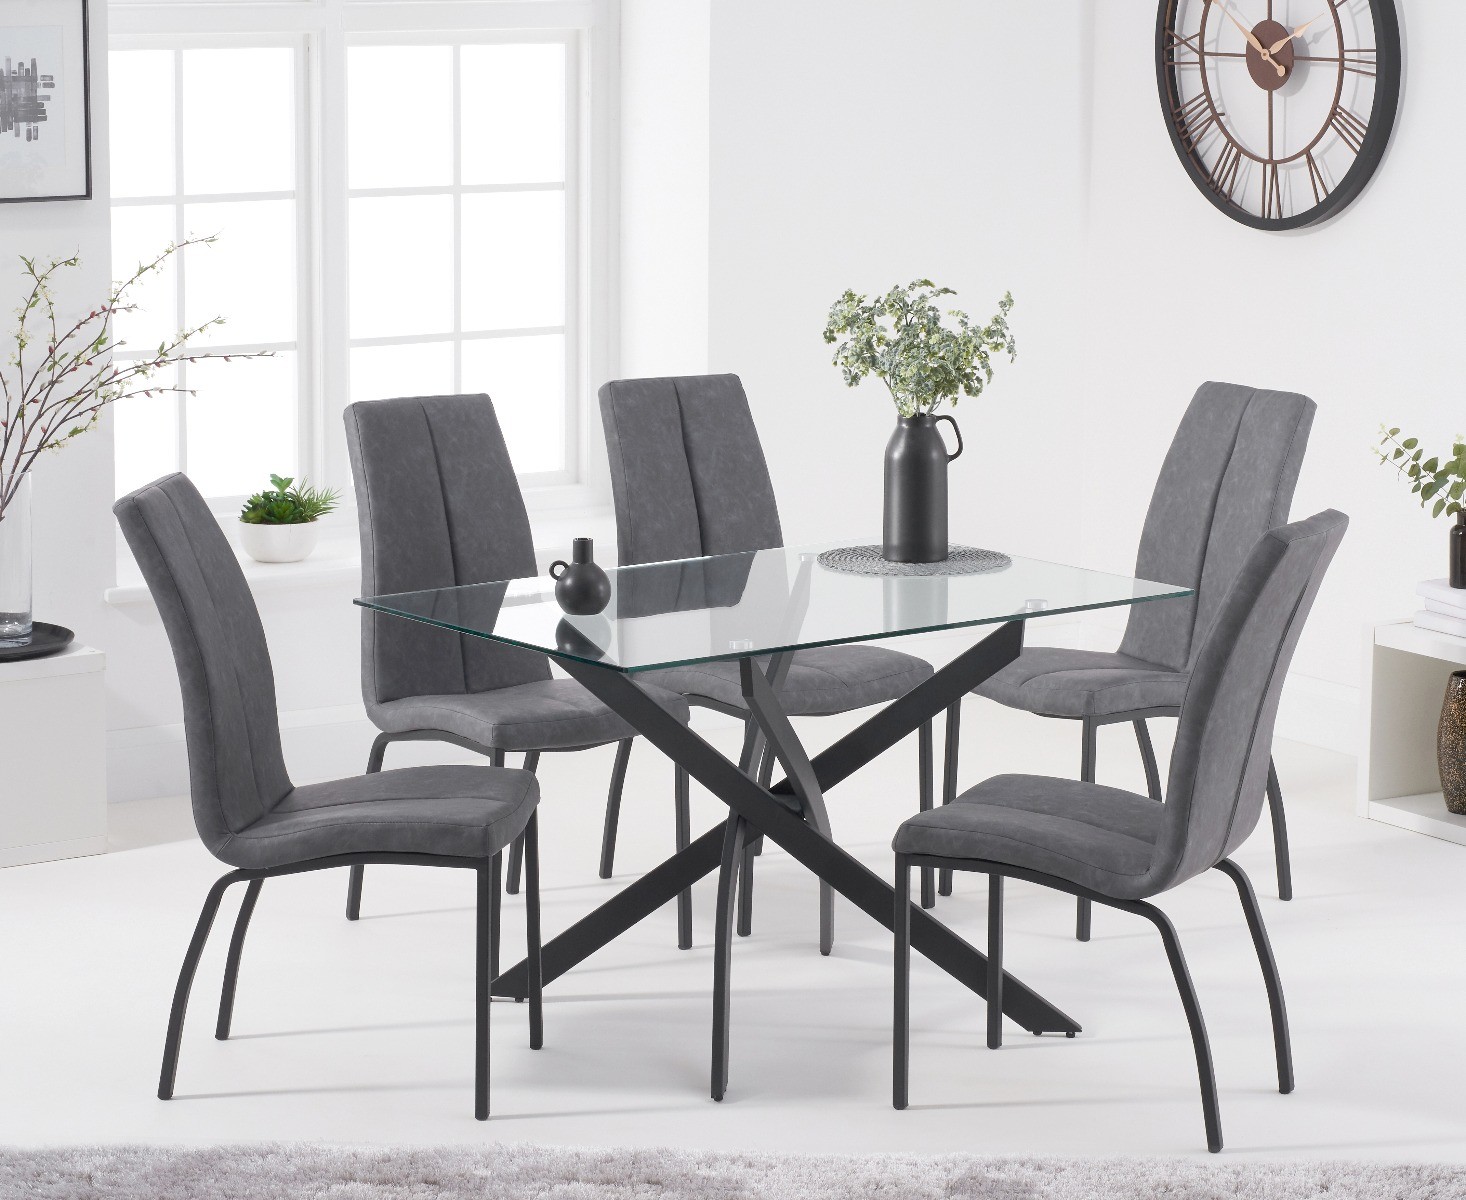 An image of Mara 120cm Rectangular Glass Dining Table with Antique Noir Chairs - Grey, 4 Cha...